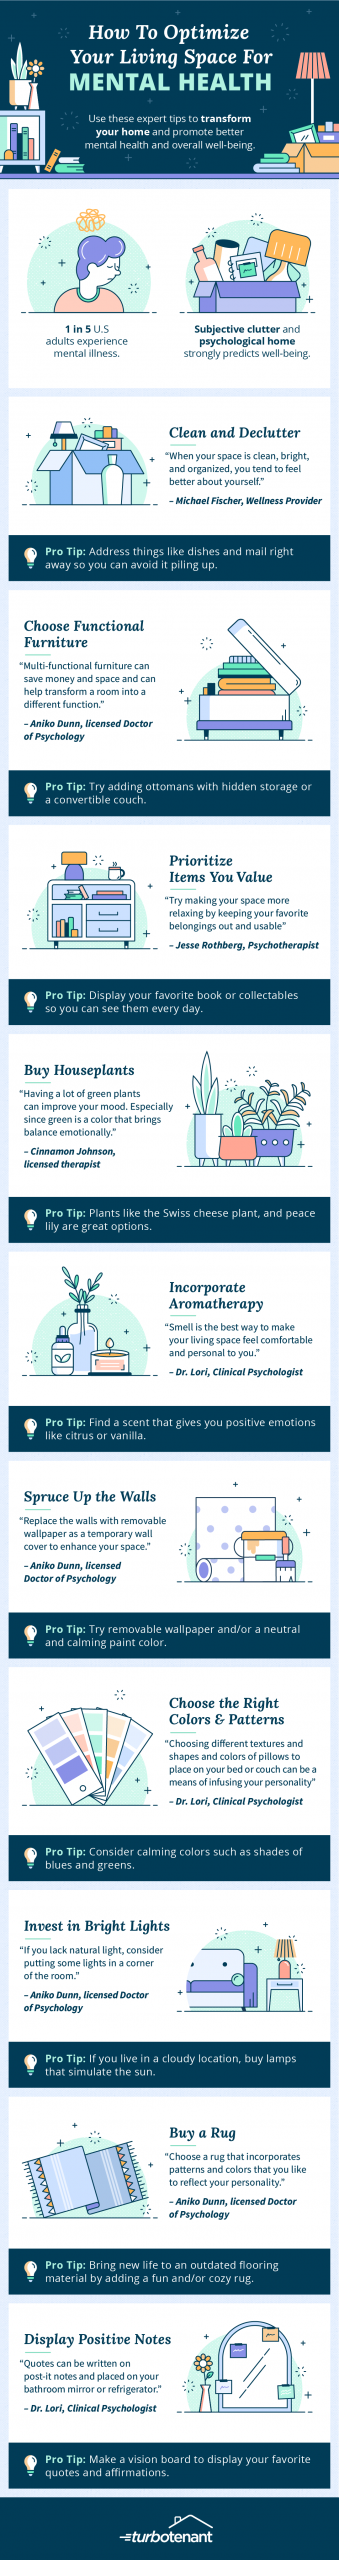 The Mental Health Benefits of Living in a Small Space